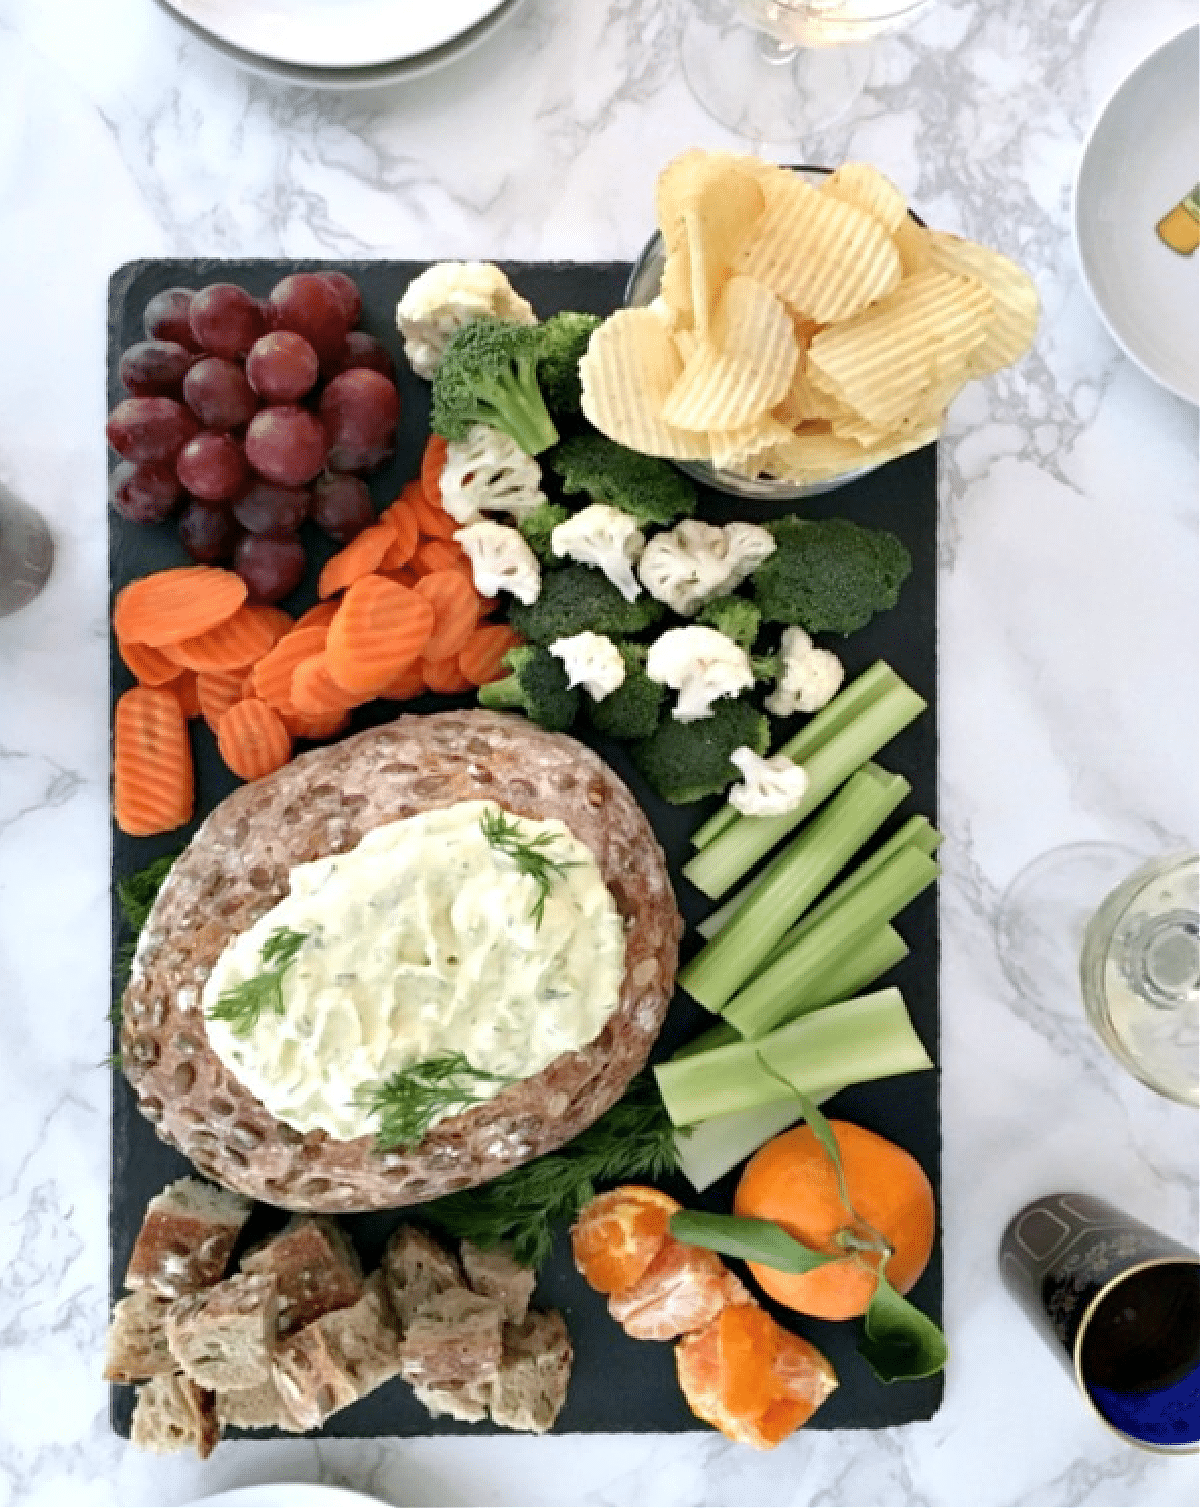 Overhead view of dill pickle dip in a bread bowl, on a black slate snack board with bread cubes, celery sticks, broccoli and cauliflower trees, ruffled potato chips, a bunch of grapes, and sliced carrots.